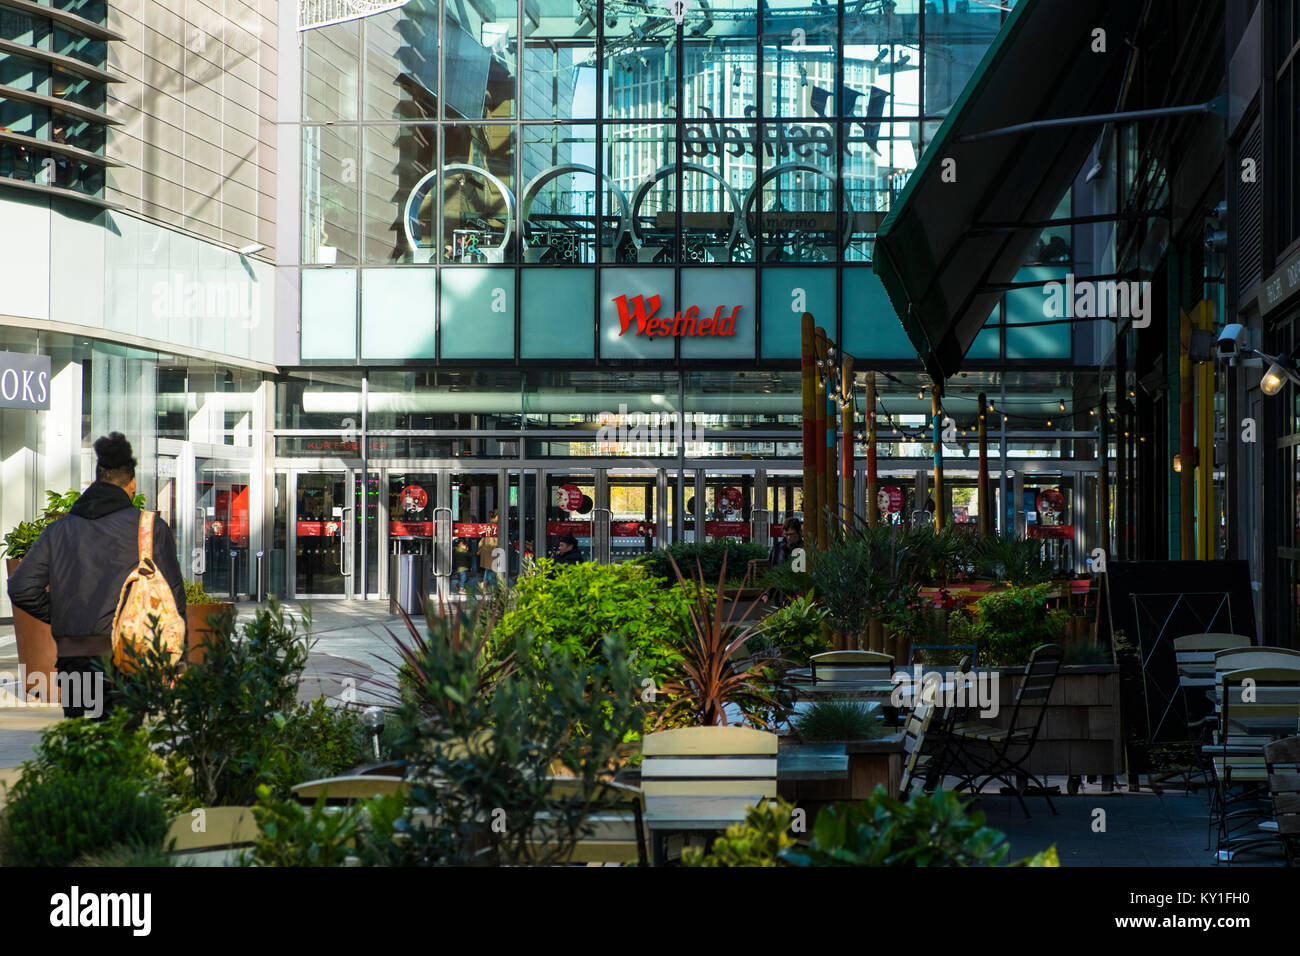 Westfield shopping centre in stratford, London, UK Stock Photo